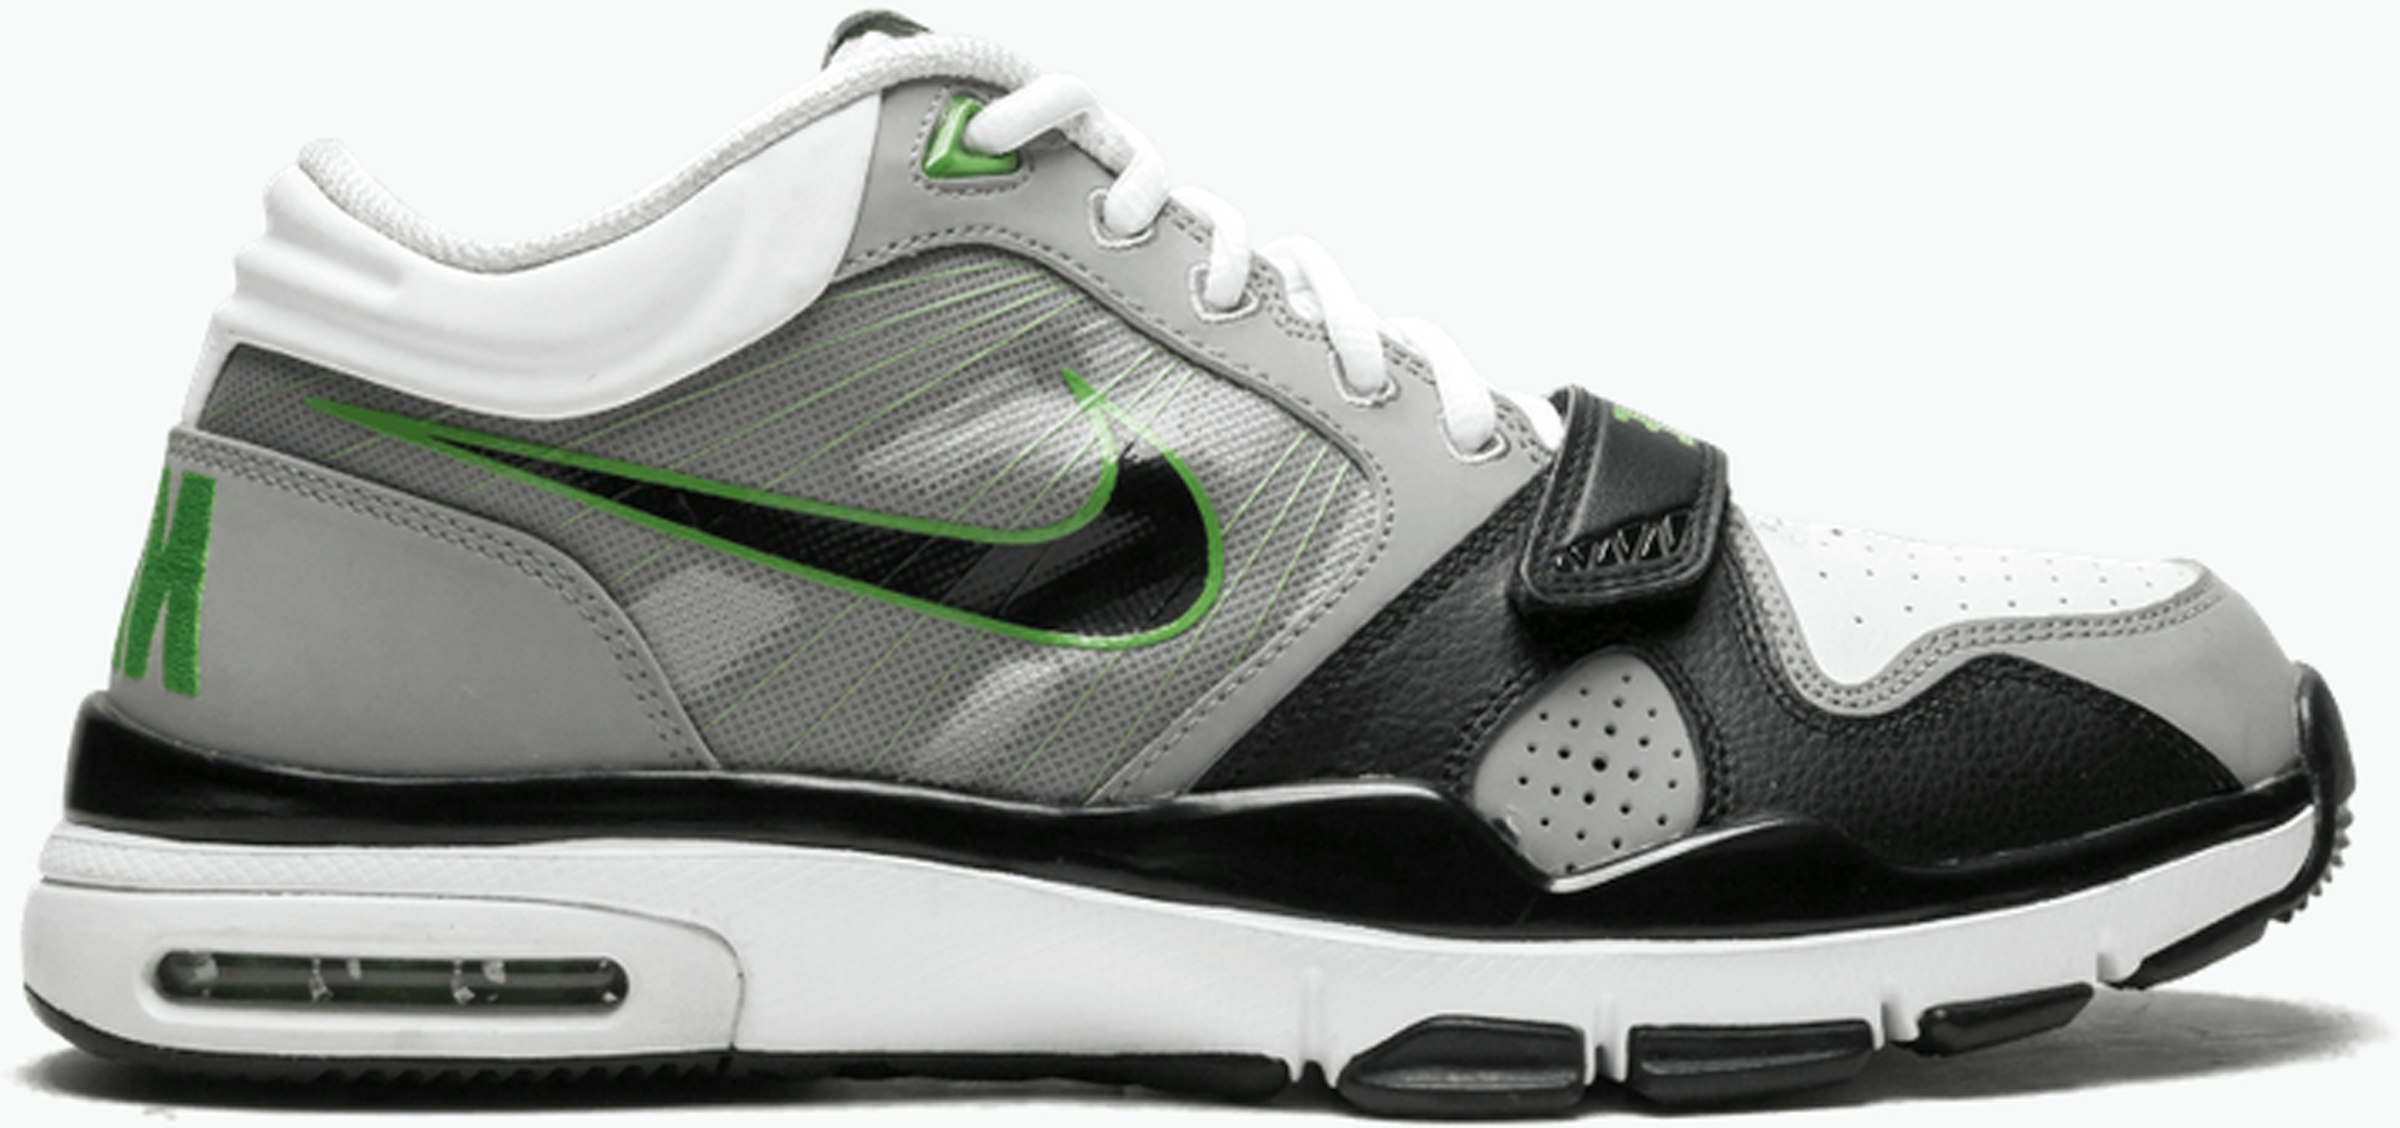 Nike Air Trainer 1.2 Mid 407766-003 -